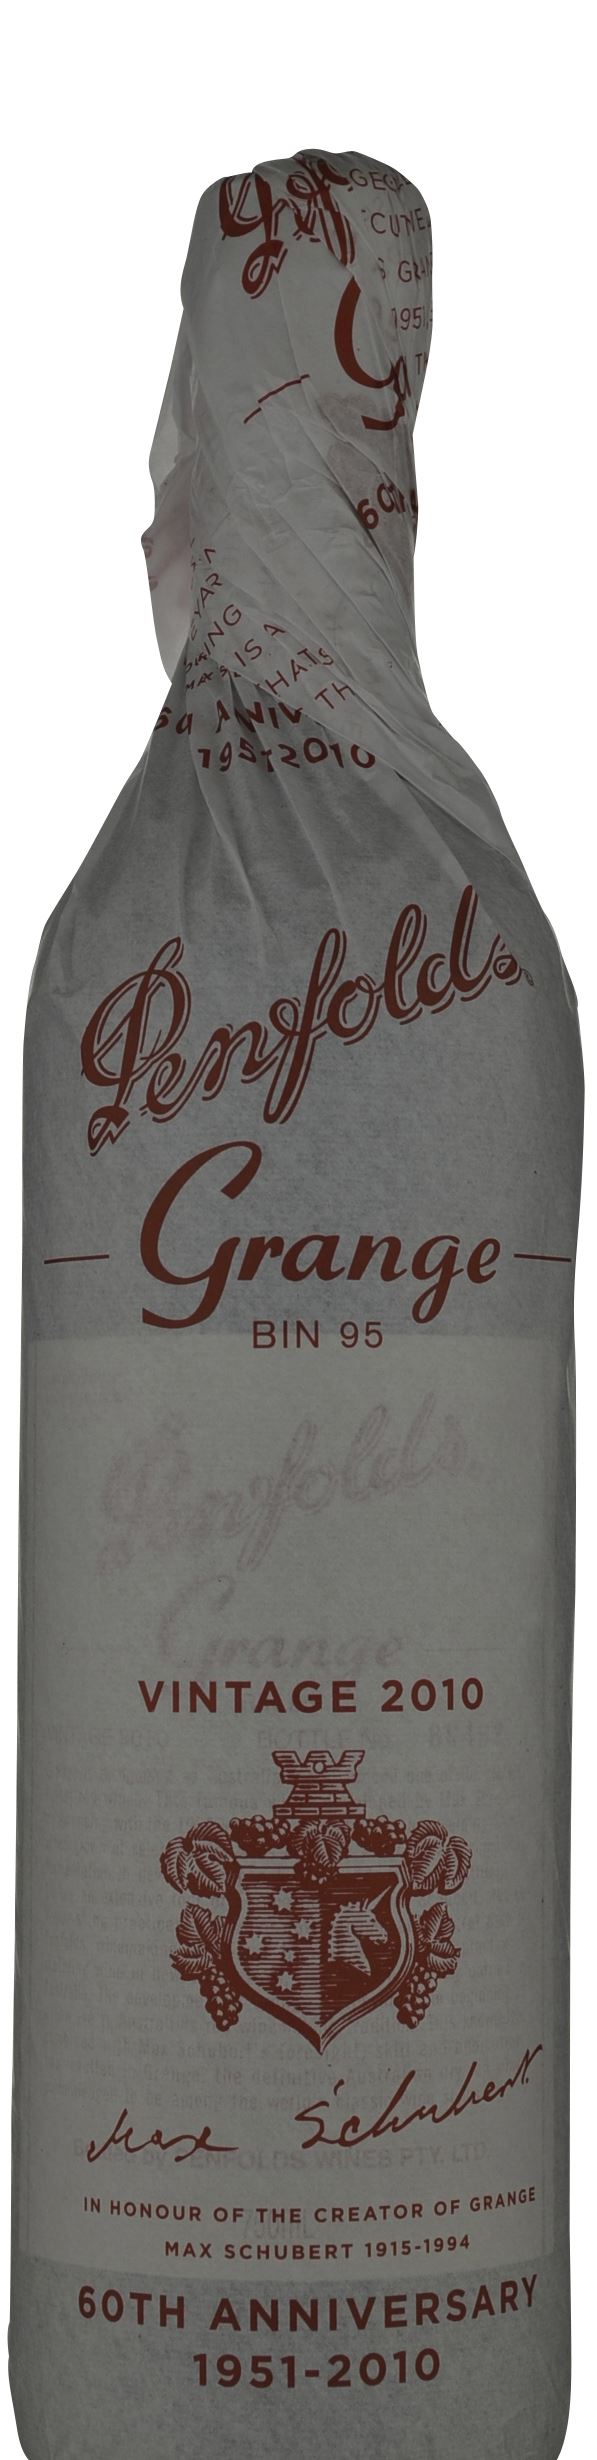 Penfolds Grange 2010 with 60th Anniversary Wrapper